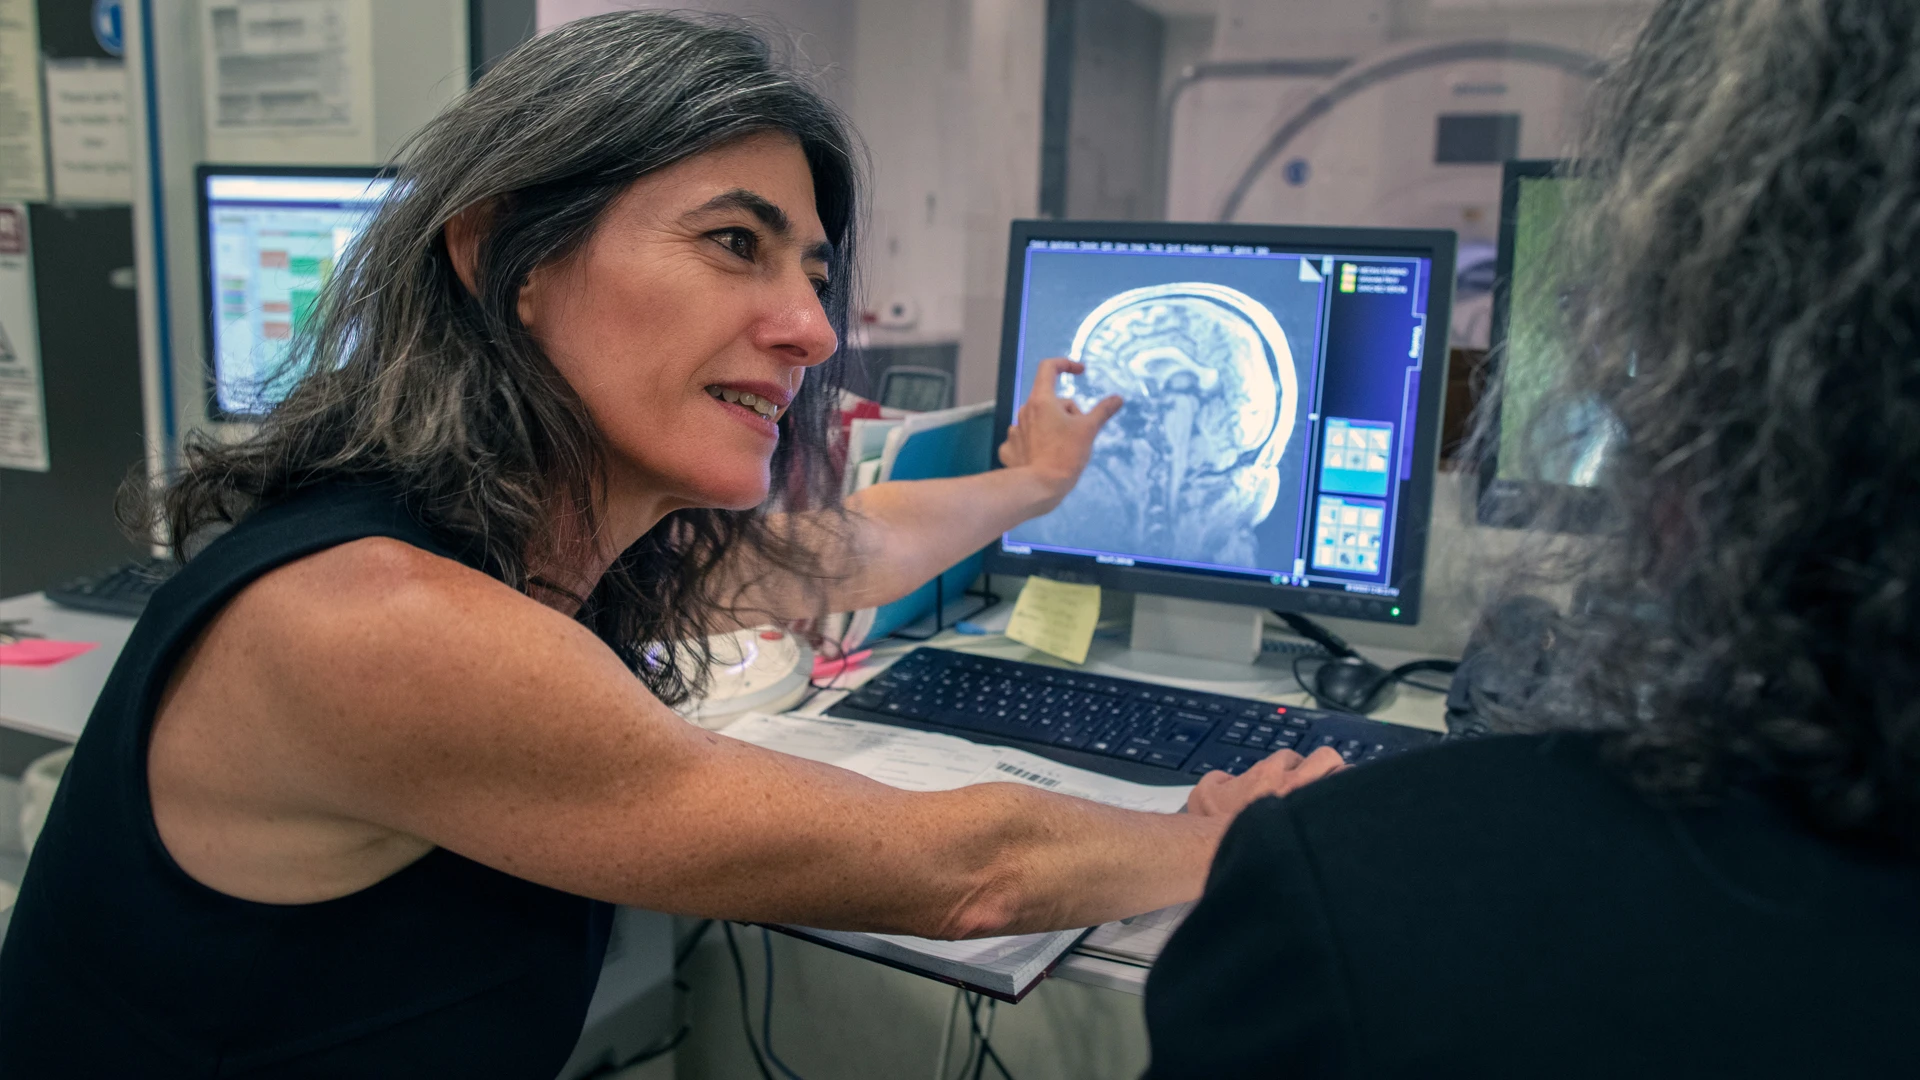 Dr. Goldstein examining a patient's brain MRI scan. Her team is pushing forward on a Phase 2 study that builds on initial findings regarding the direct brain stimulation of brain regions involved in cocaine and heroin addiction.